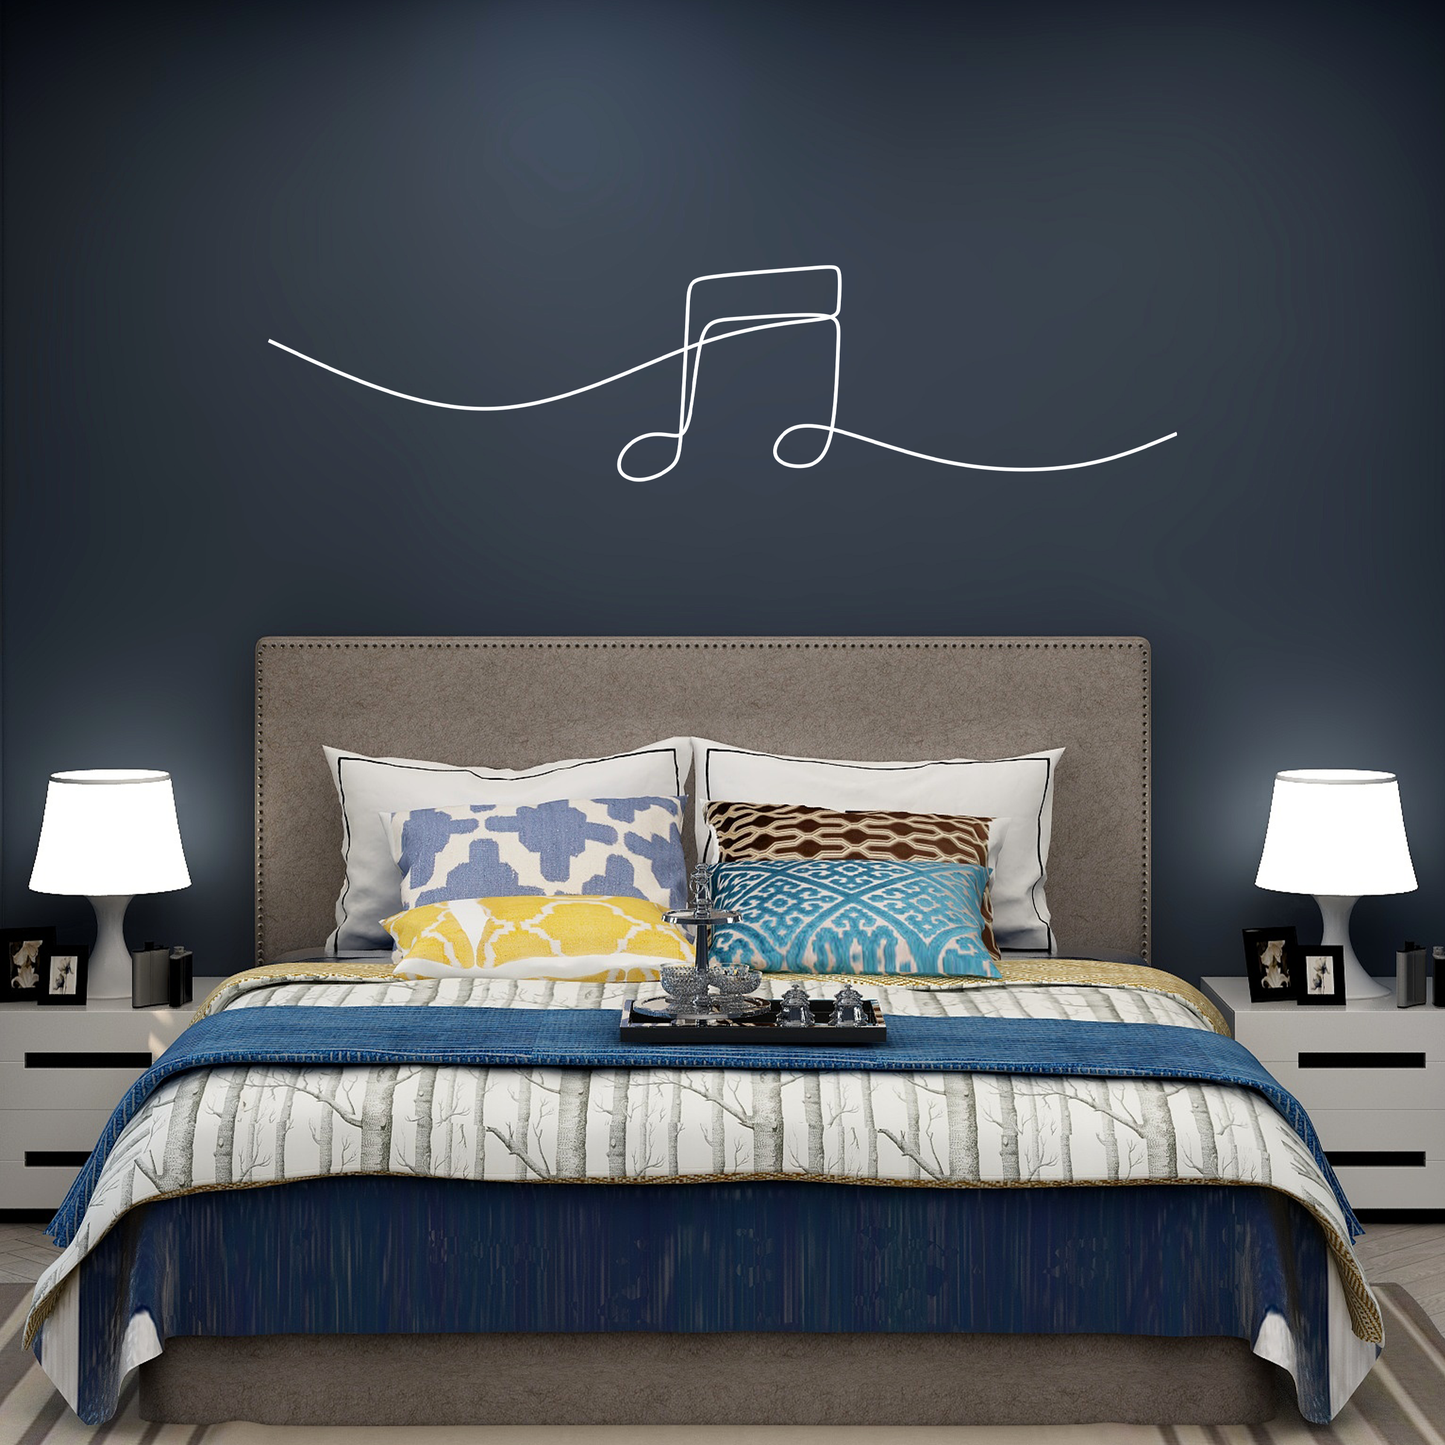 Continuous Note Wall Sticker Decal